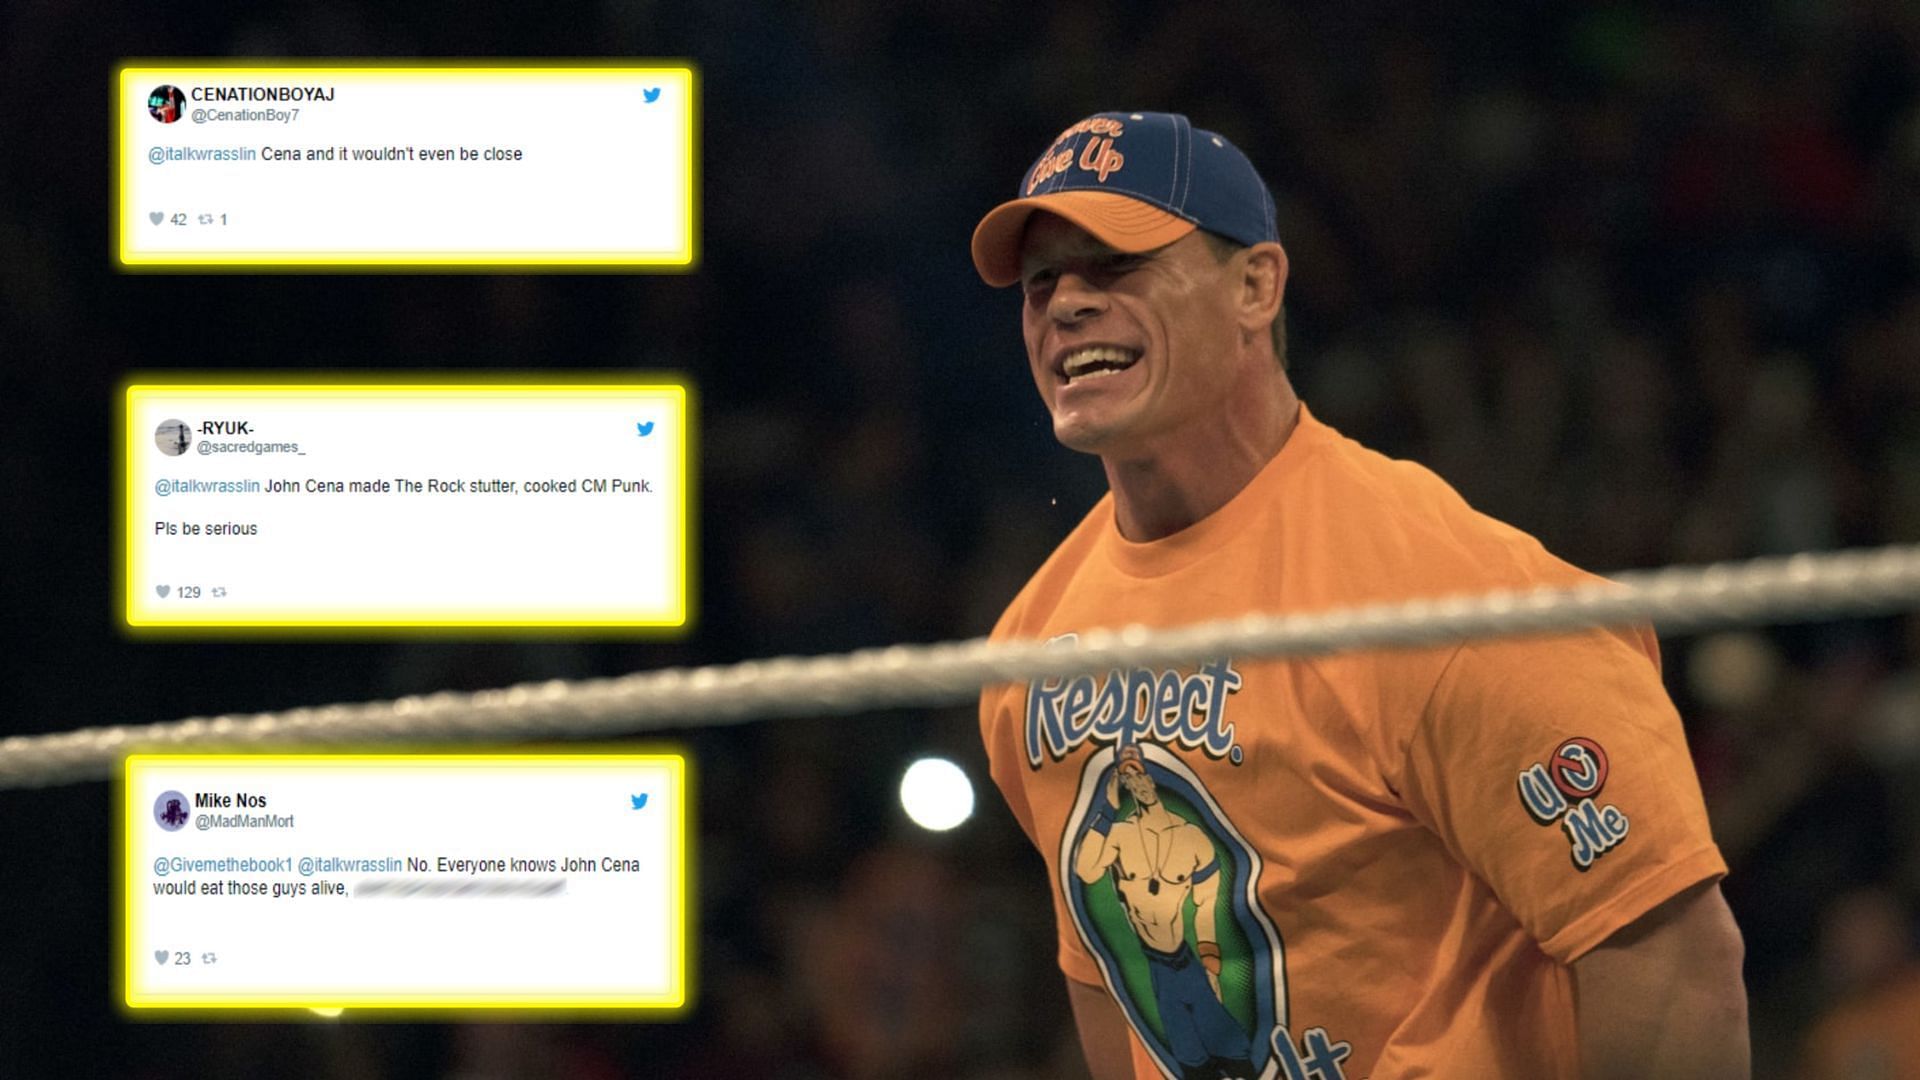 Could these two stars stand a chance against John Cena?